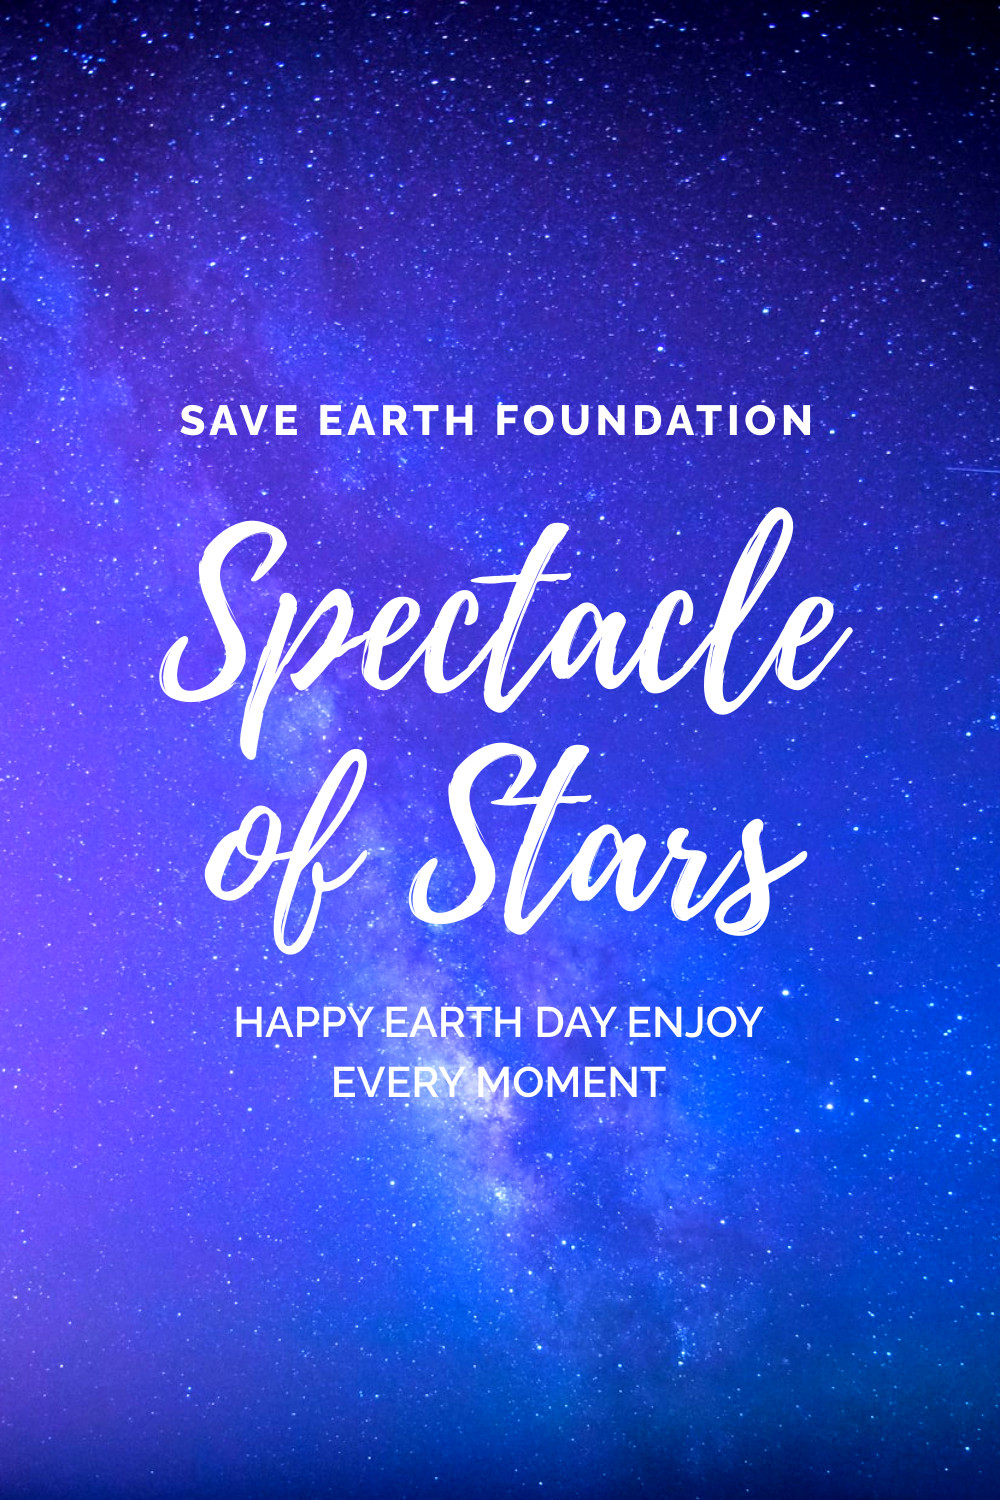 Earth Day Spectacle of Stars